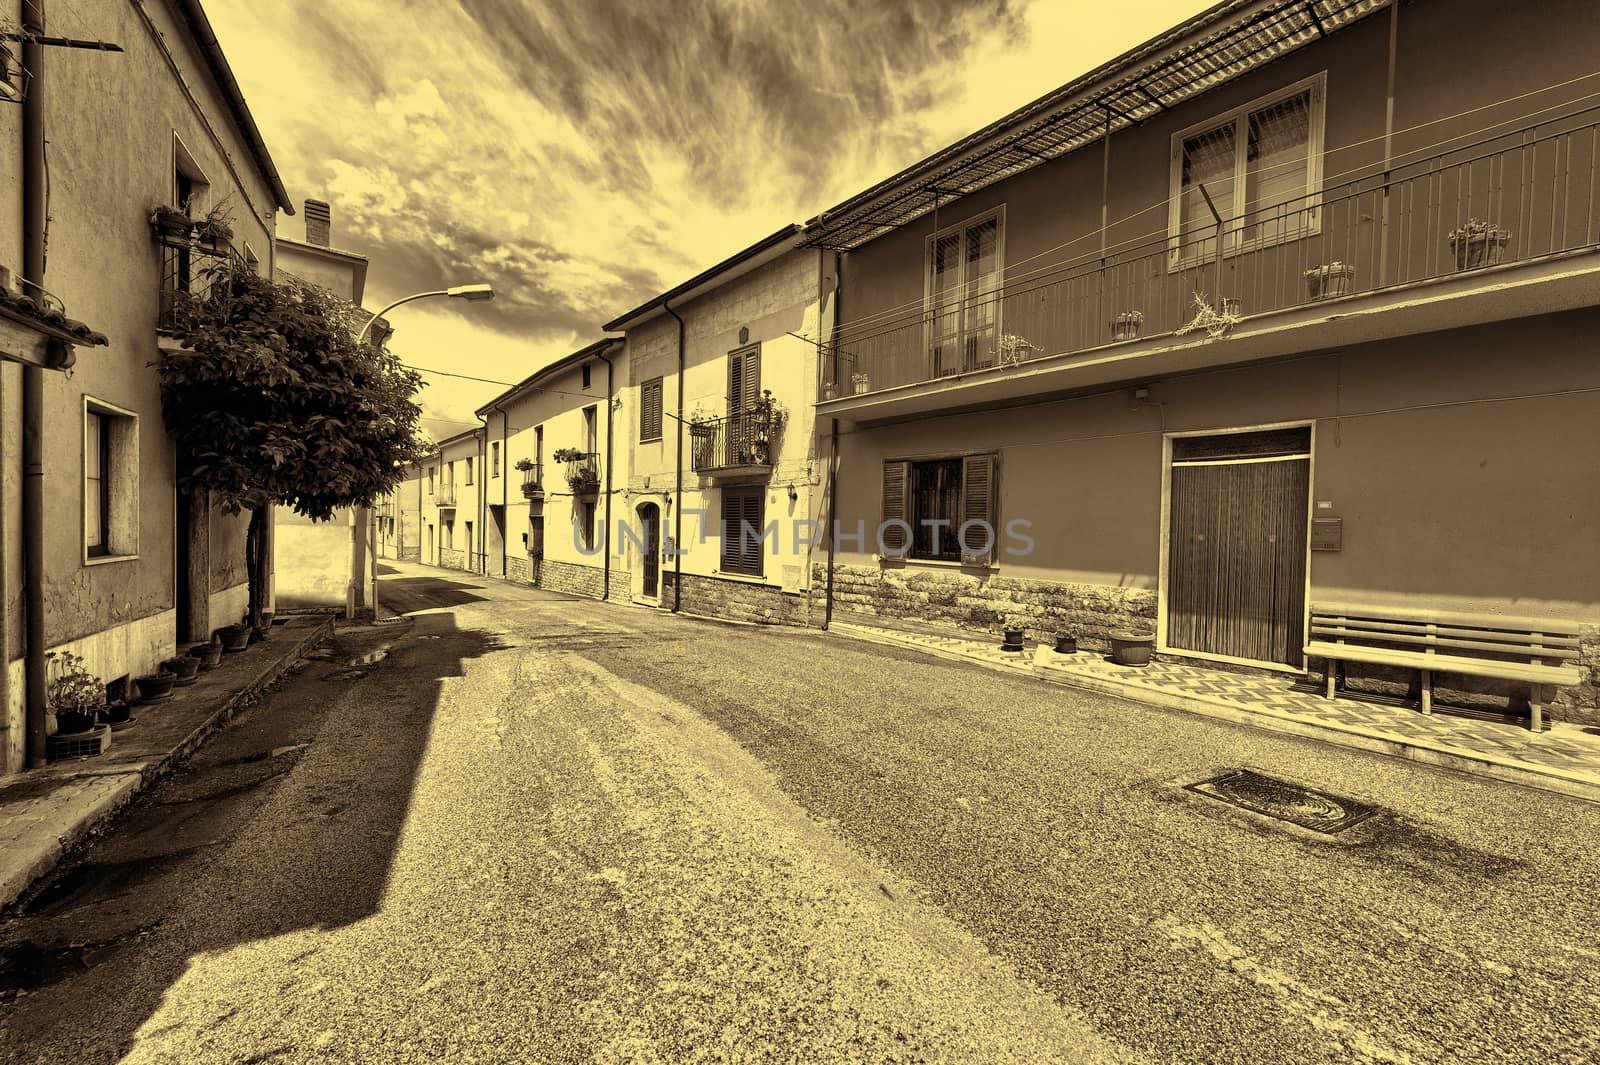 Street with Old Buildings in the Small Italian City, Retro Image Filtered Style 